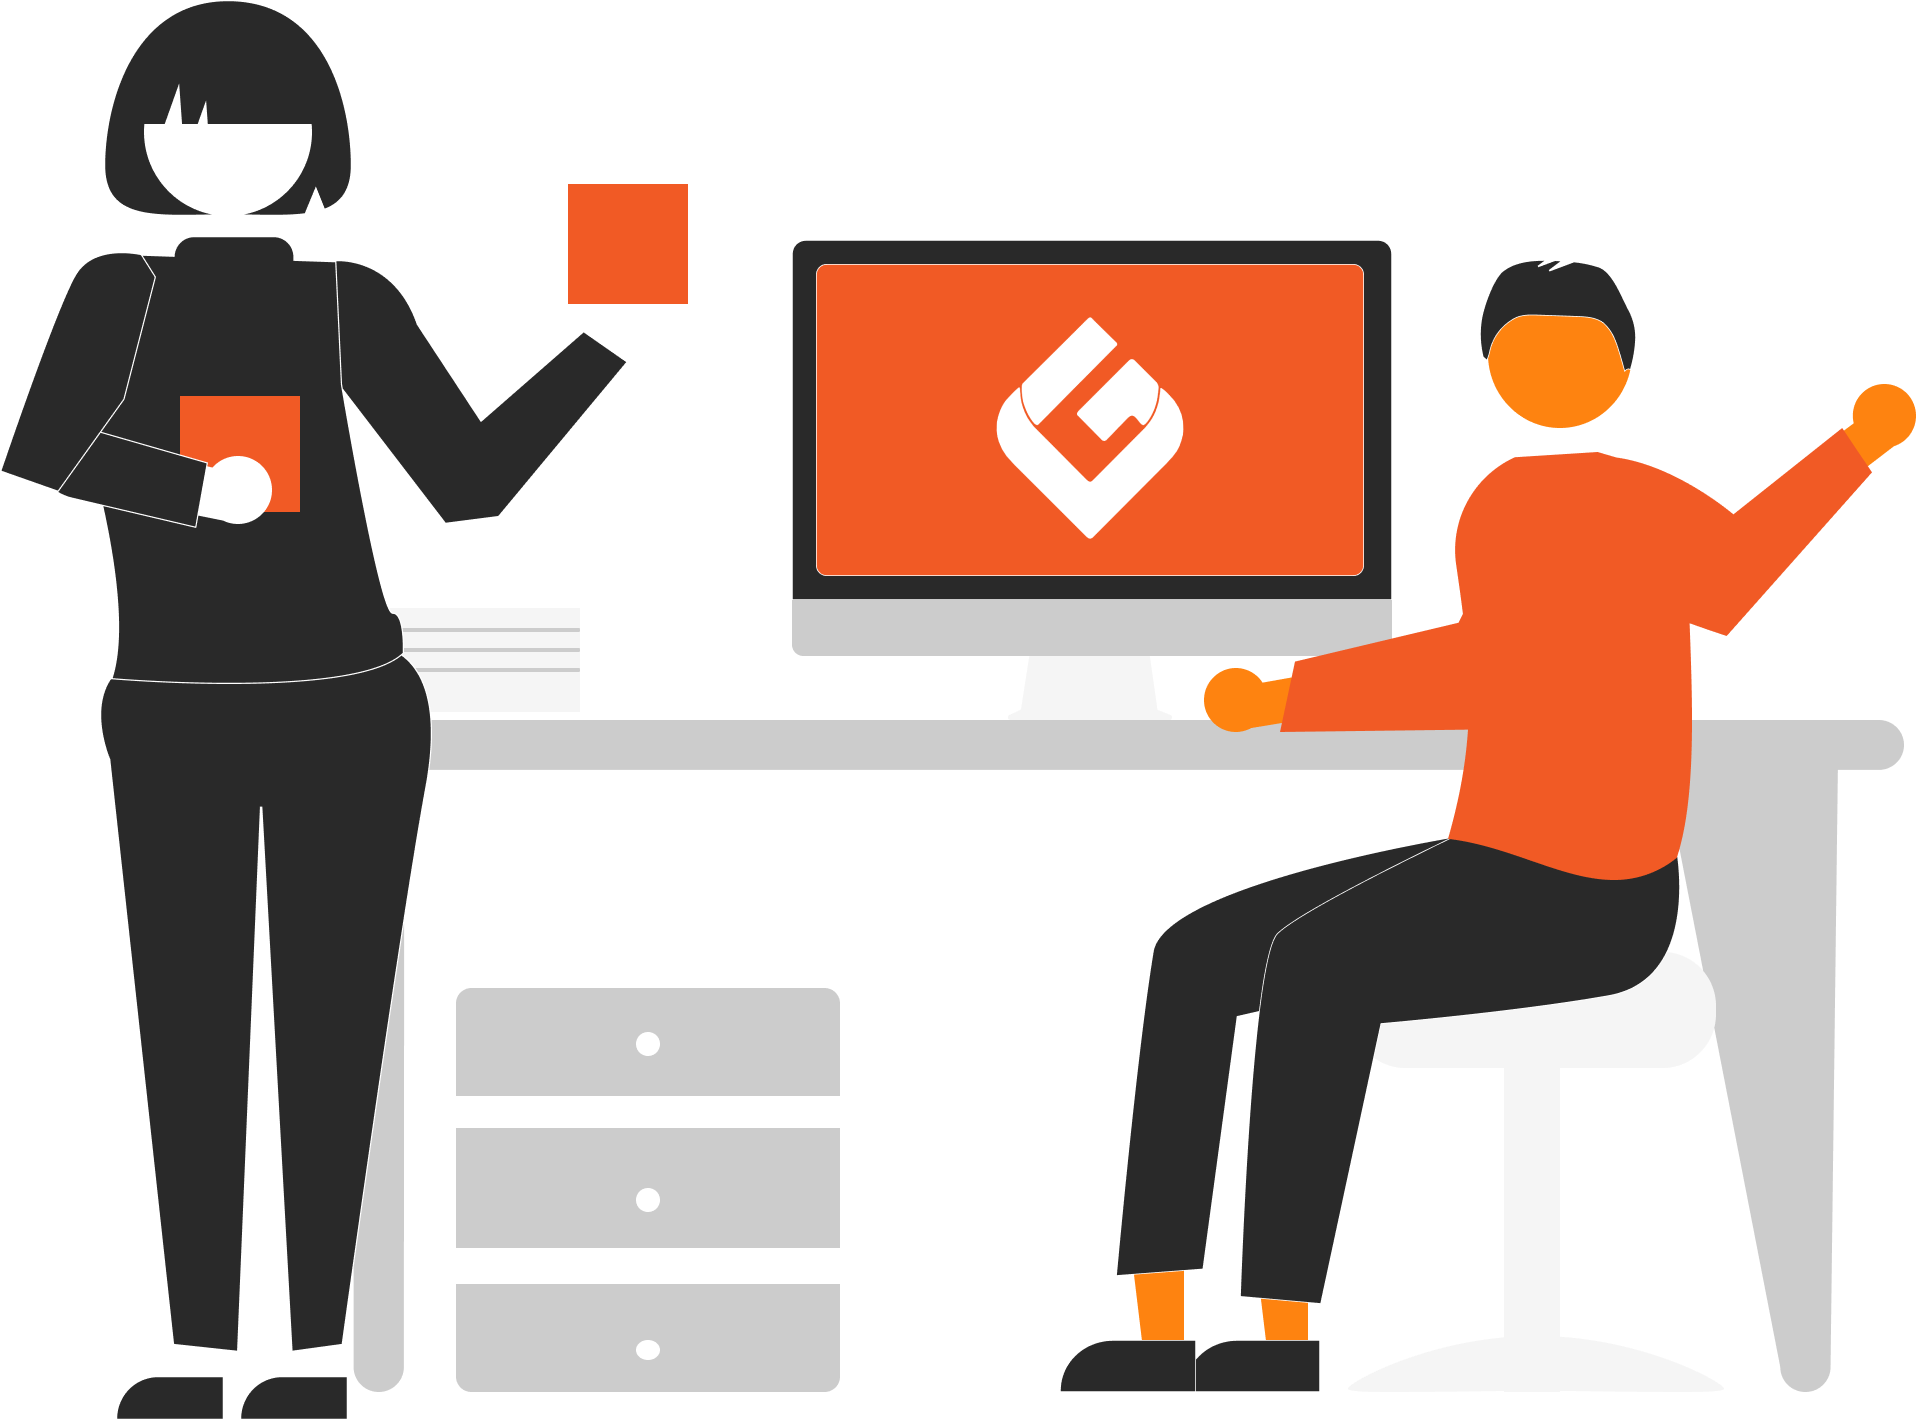 Man and woman using a computer with the LeadGeeks logo